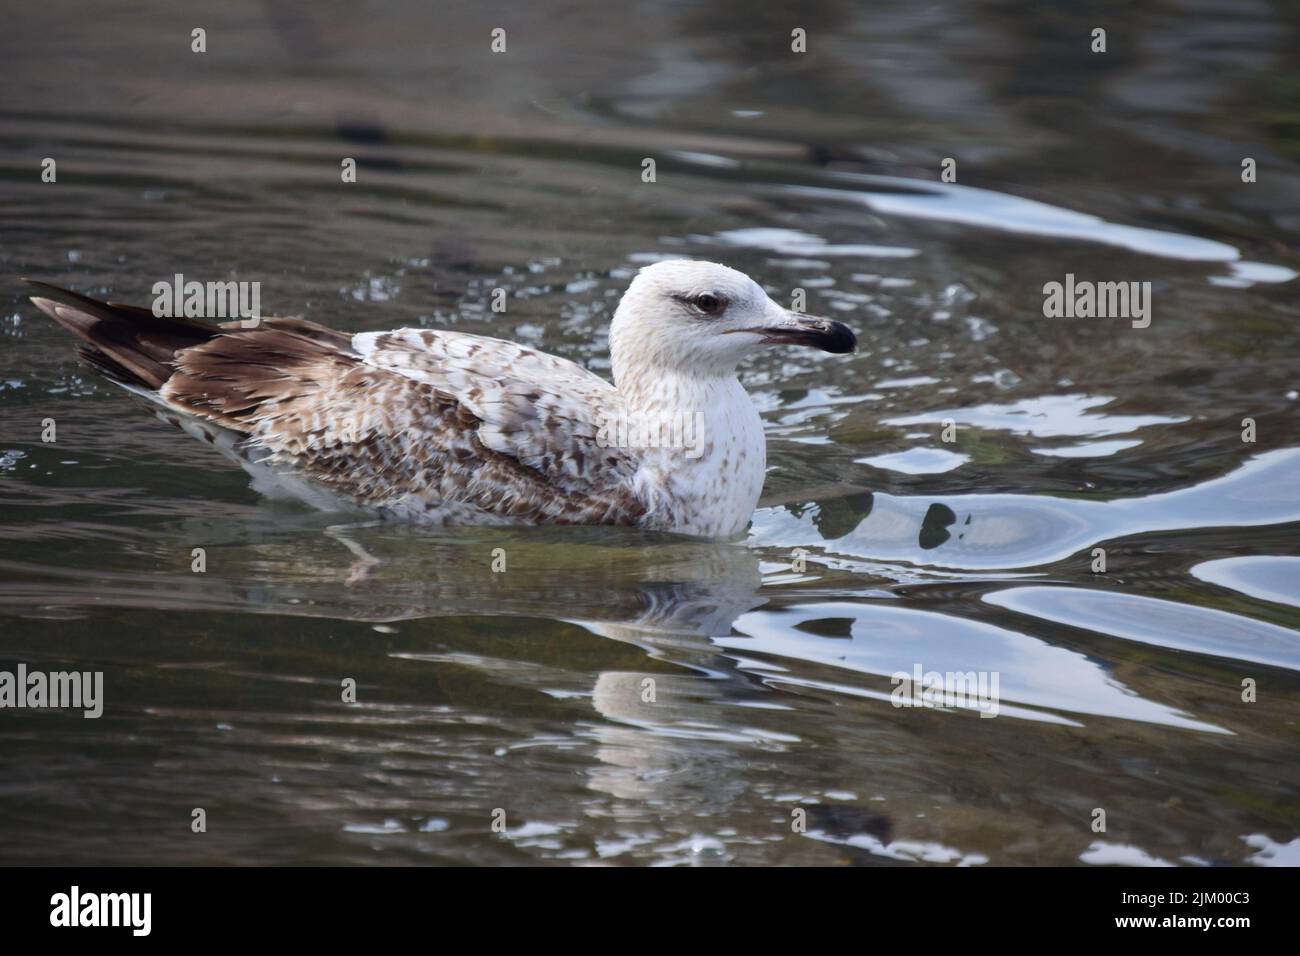 A closeup of a herring gull (Larus argentatus) with white and brown plumage bathing in a park pond Stock Photo